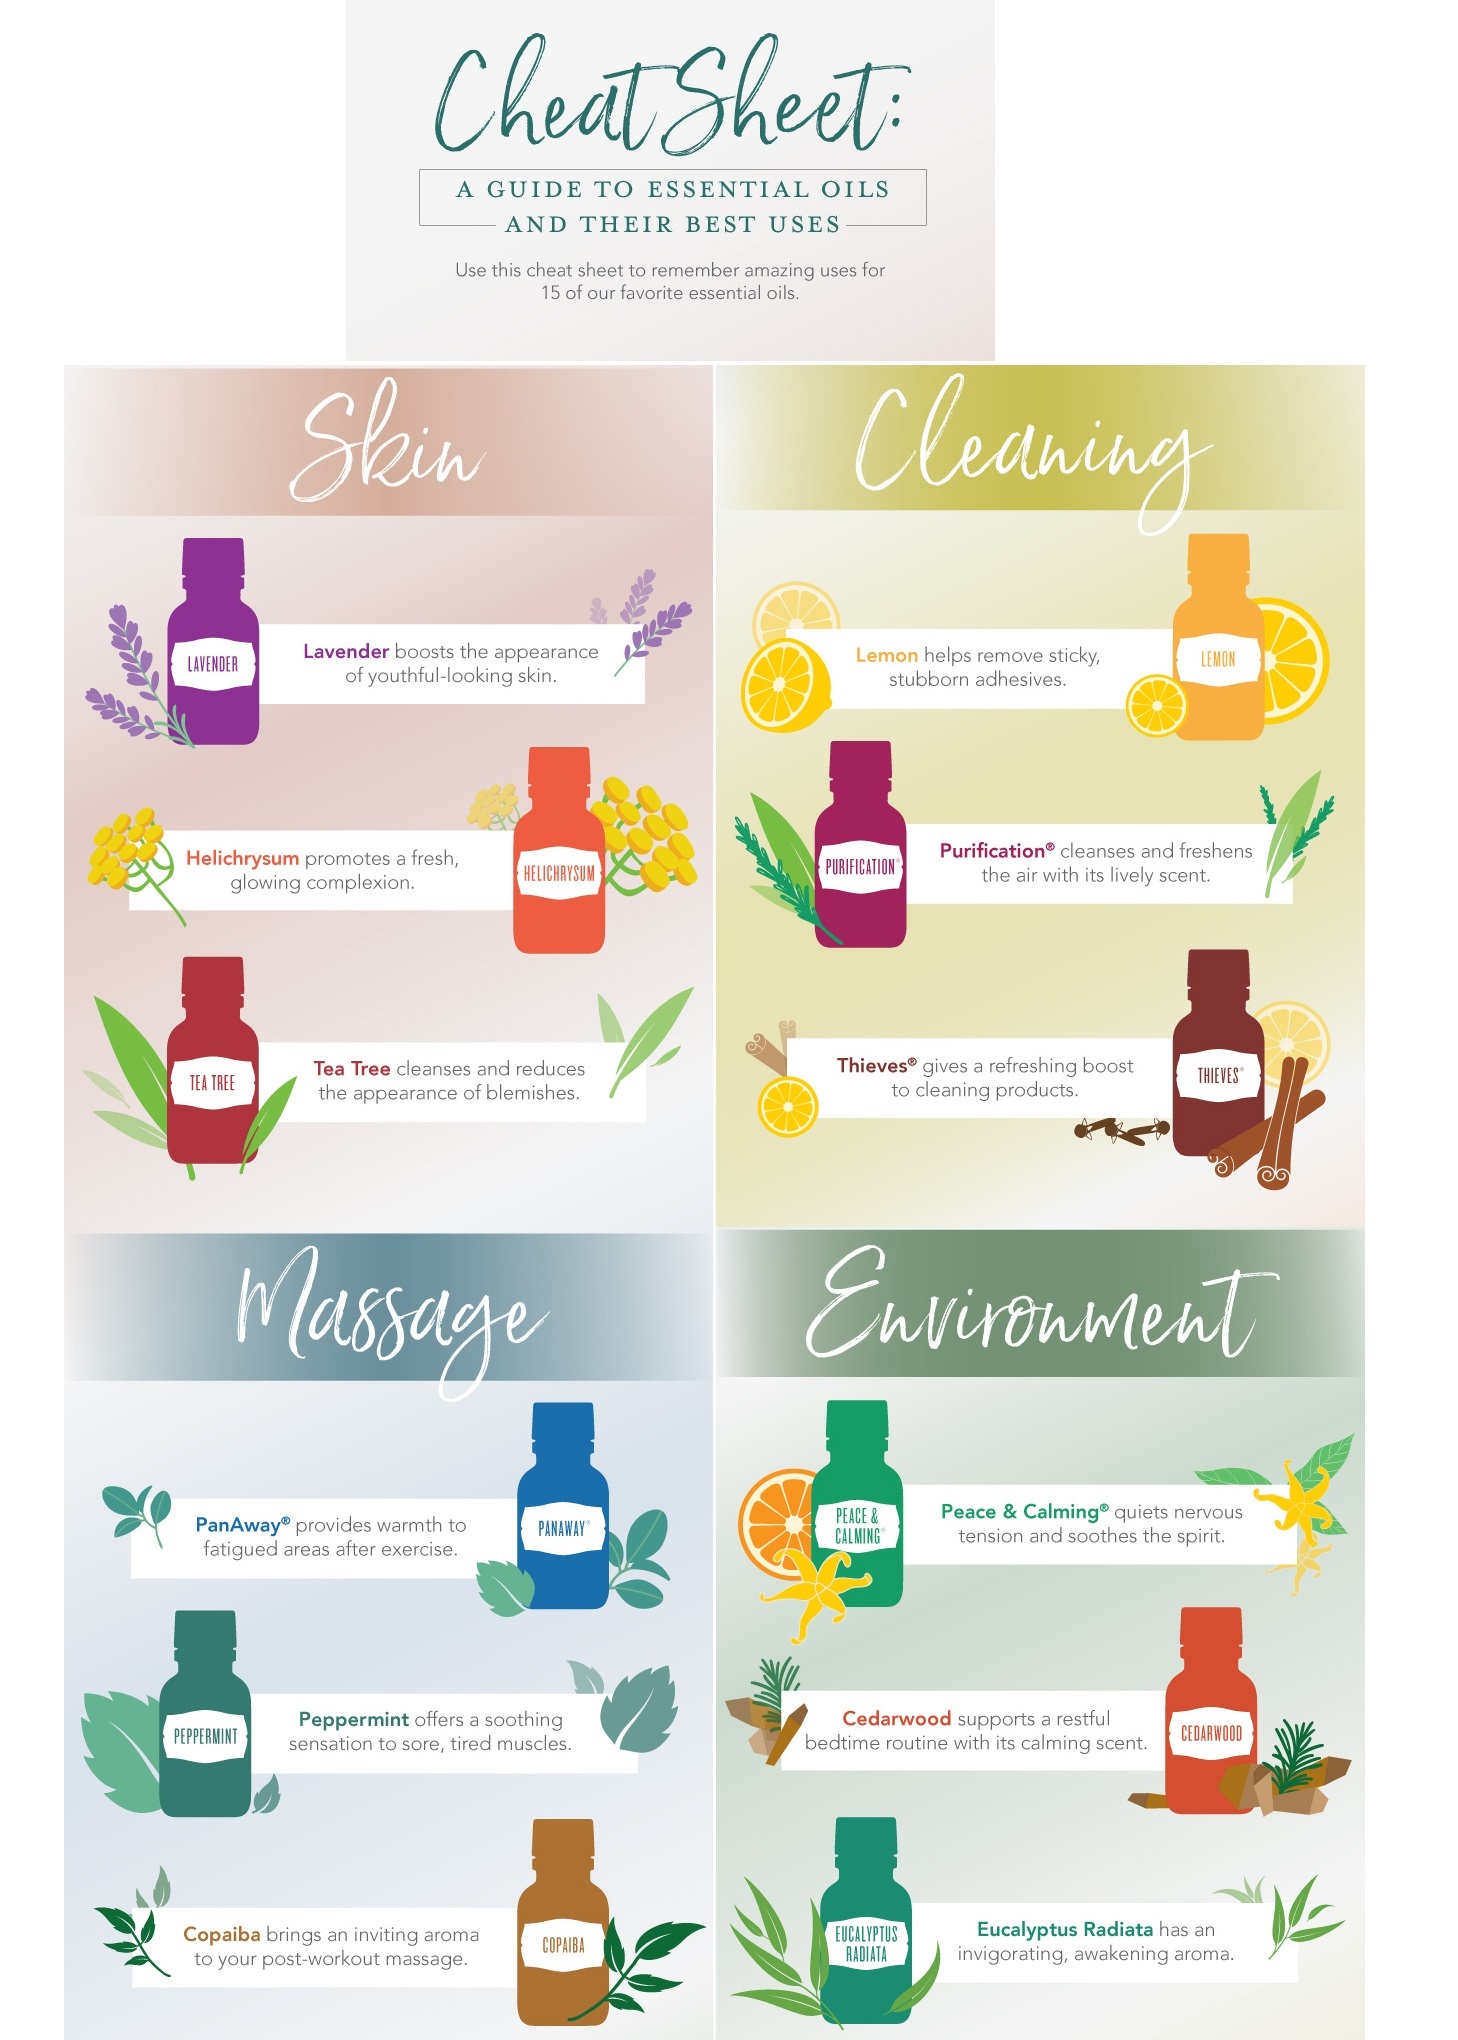 Cheat sheet: A guide to essential oils and their best uses